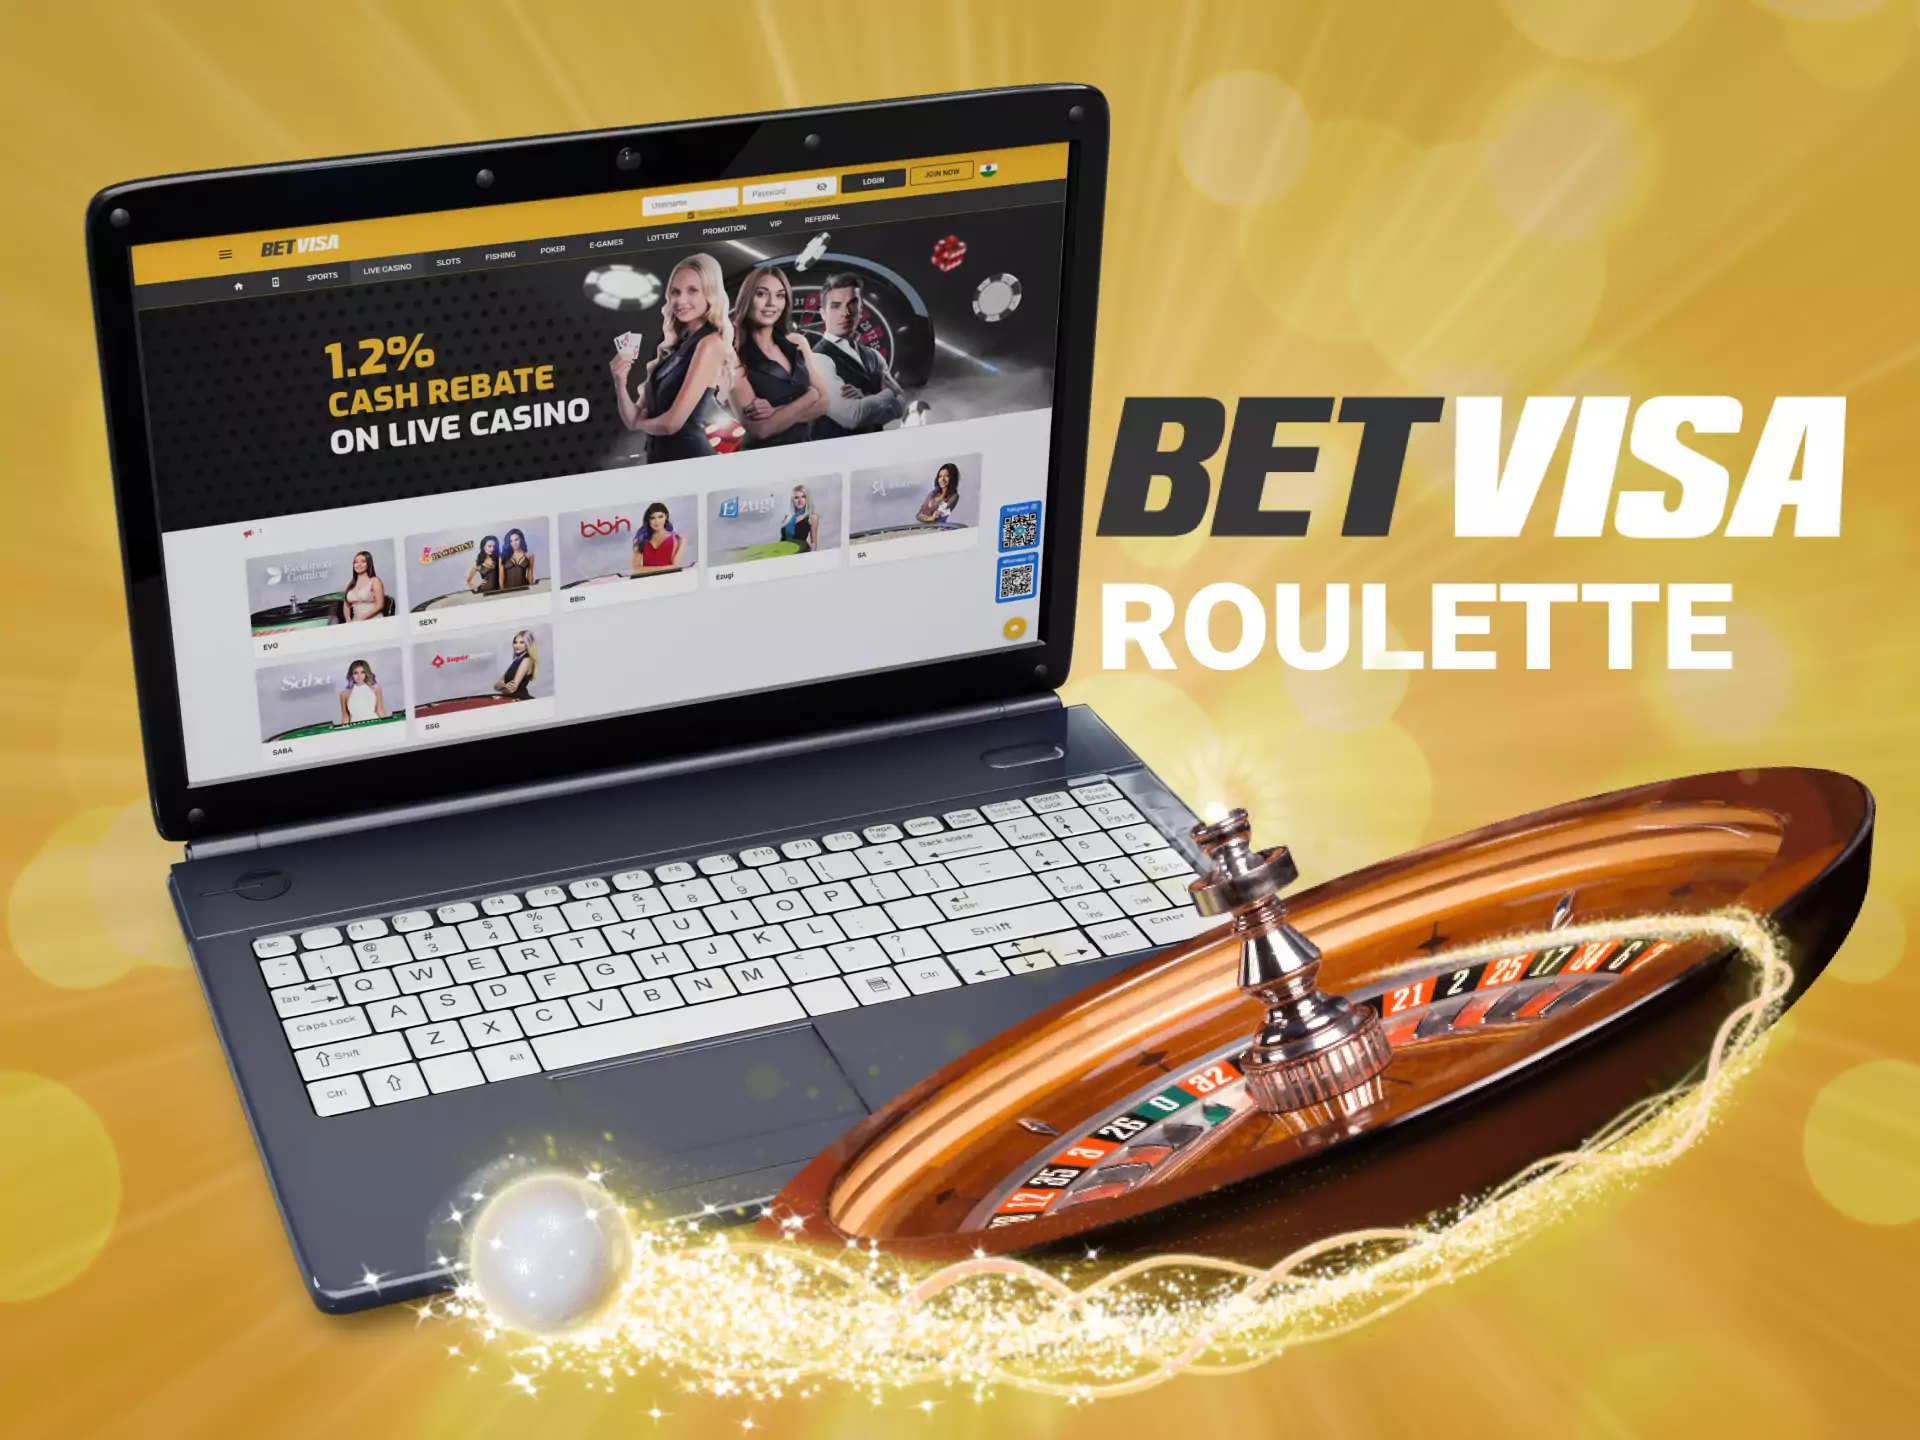 You can play different types of roulettes in the Betvisa Casino.